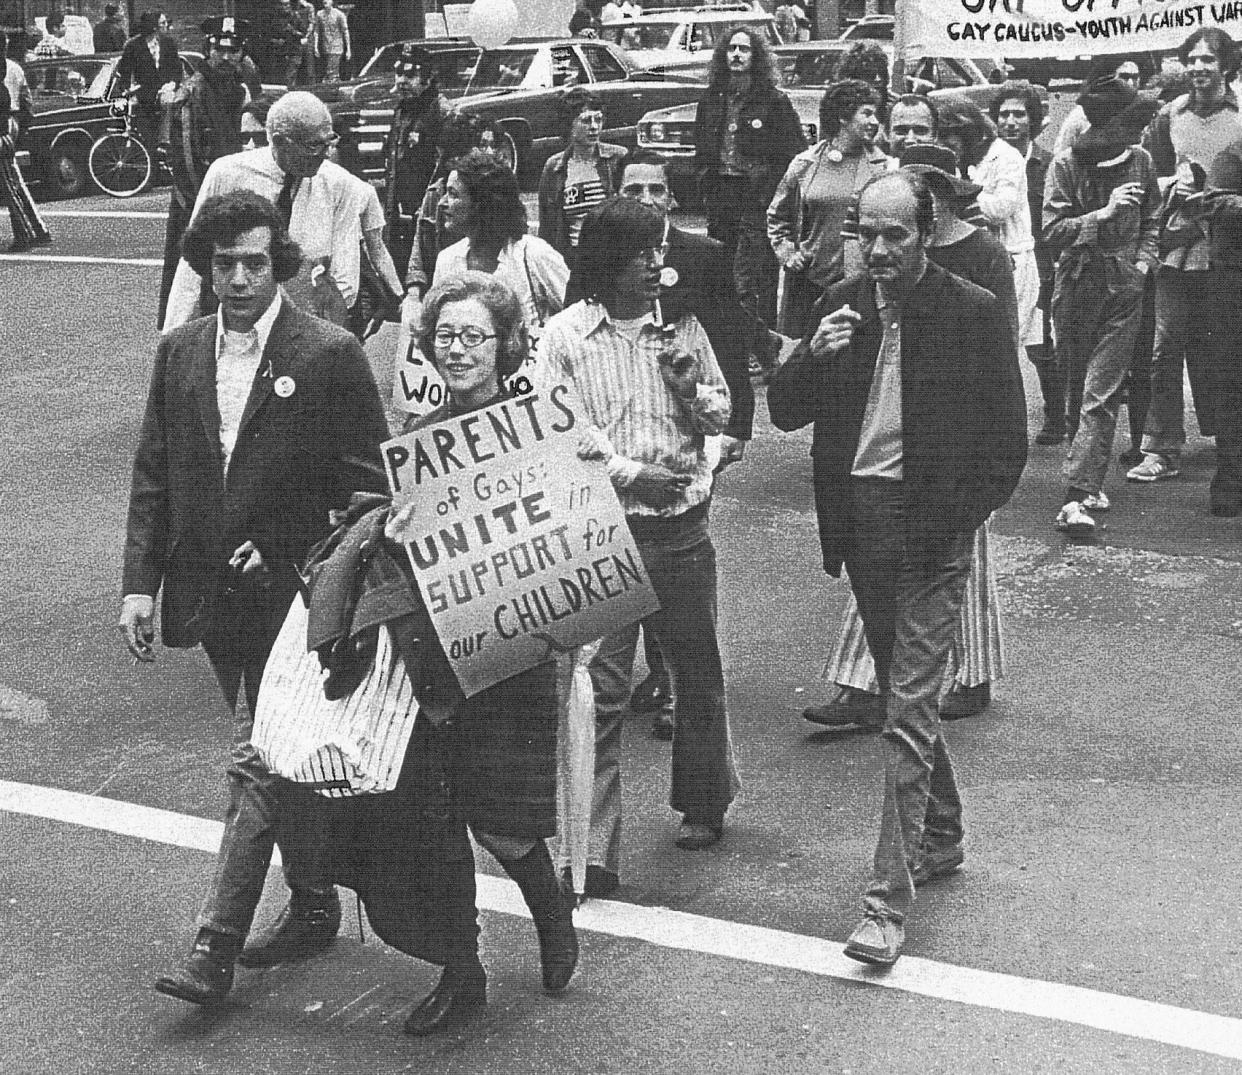 The moment that started it all: Jeanne Manford marches with son Morty Manford at the 1972 Christopher Street Liberation Day March. (Photo: Courtesy of PFLAG)